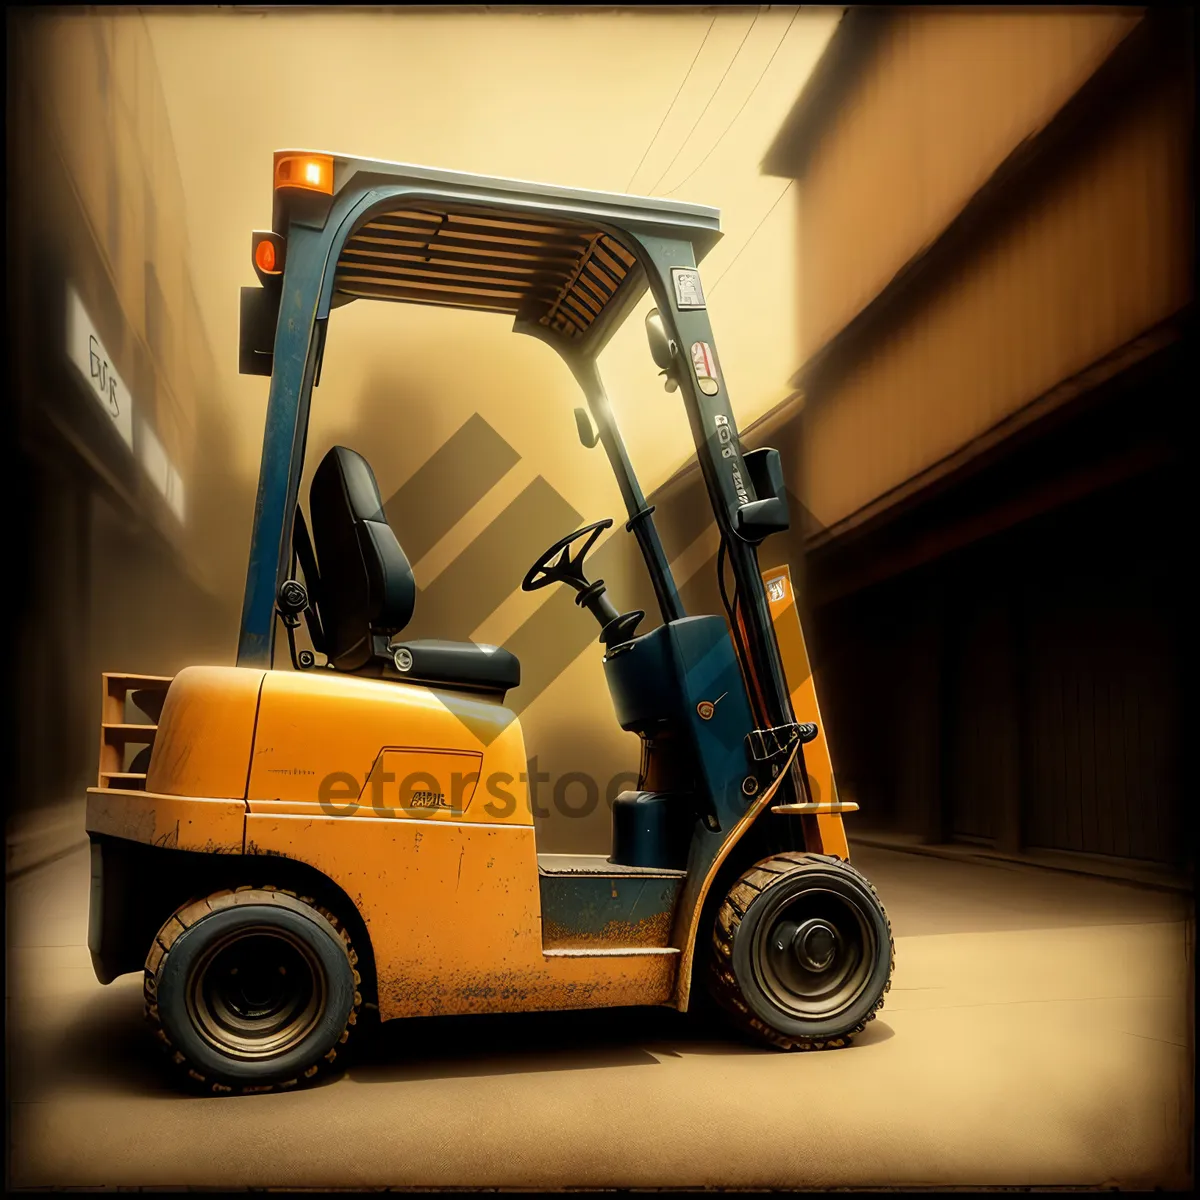 Picture of Wheeled Transport for Cargo Delivery: Forklift Truck